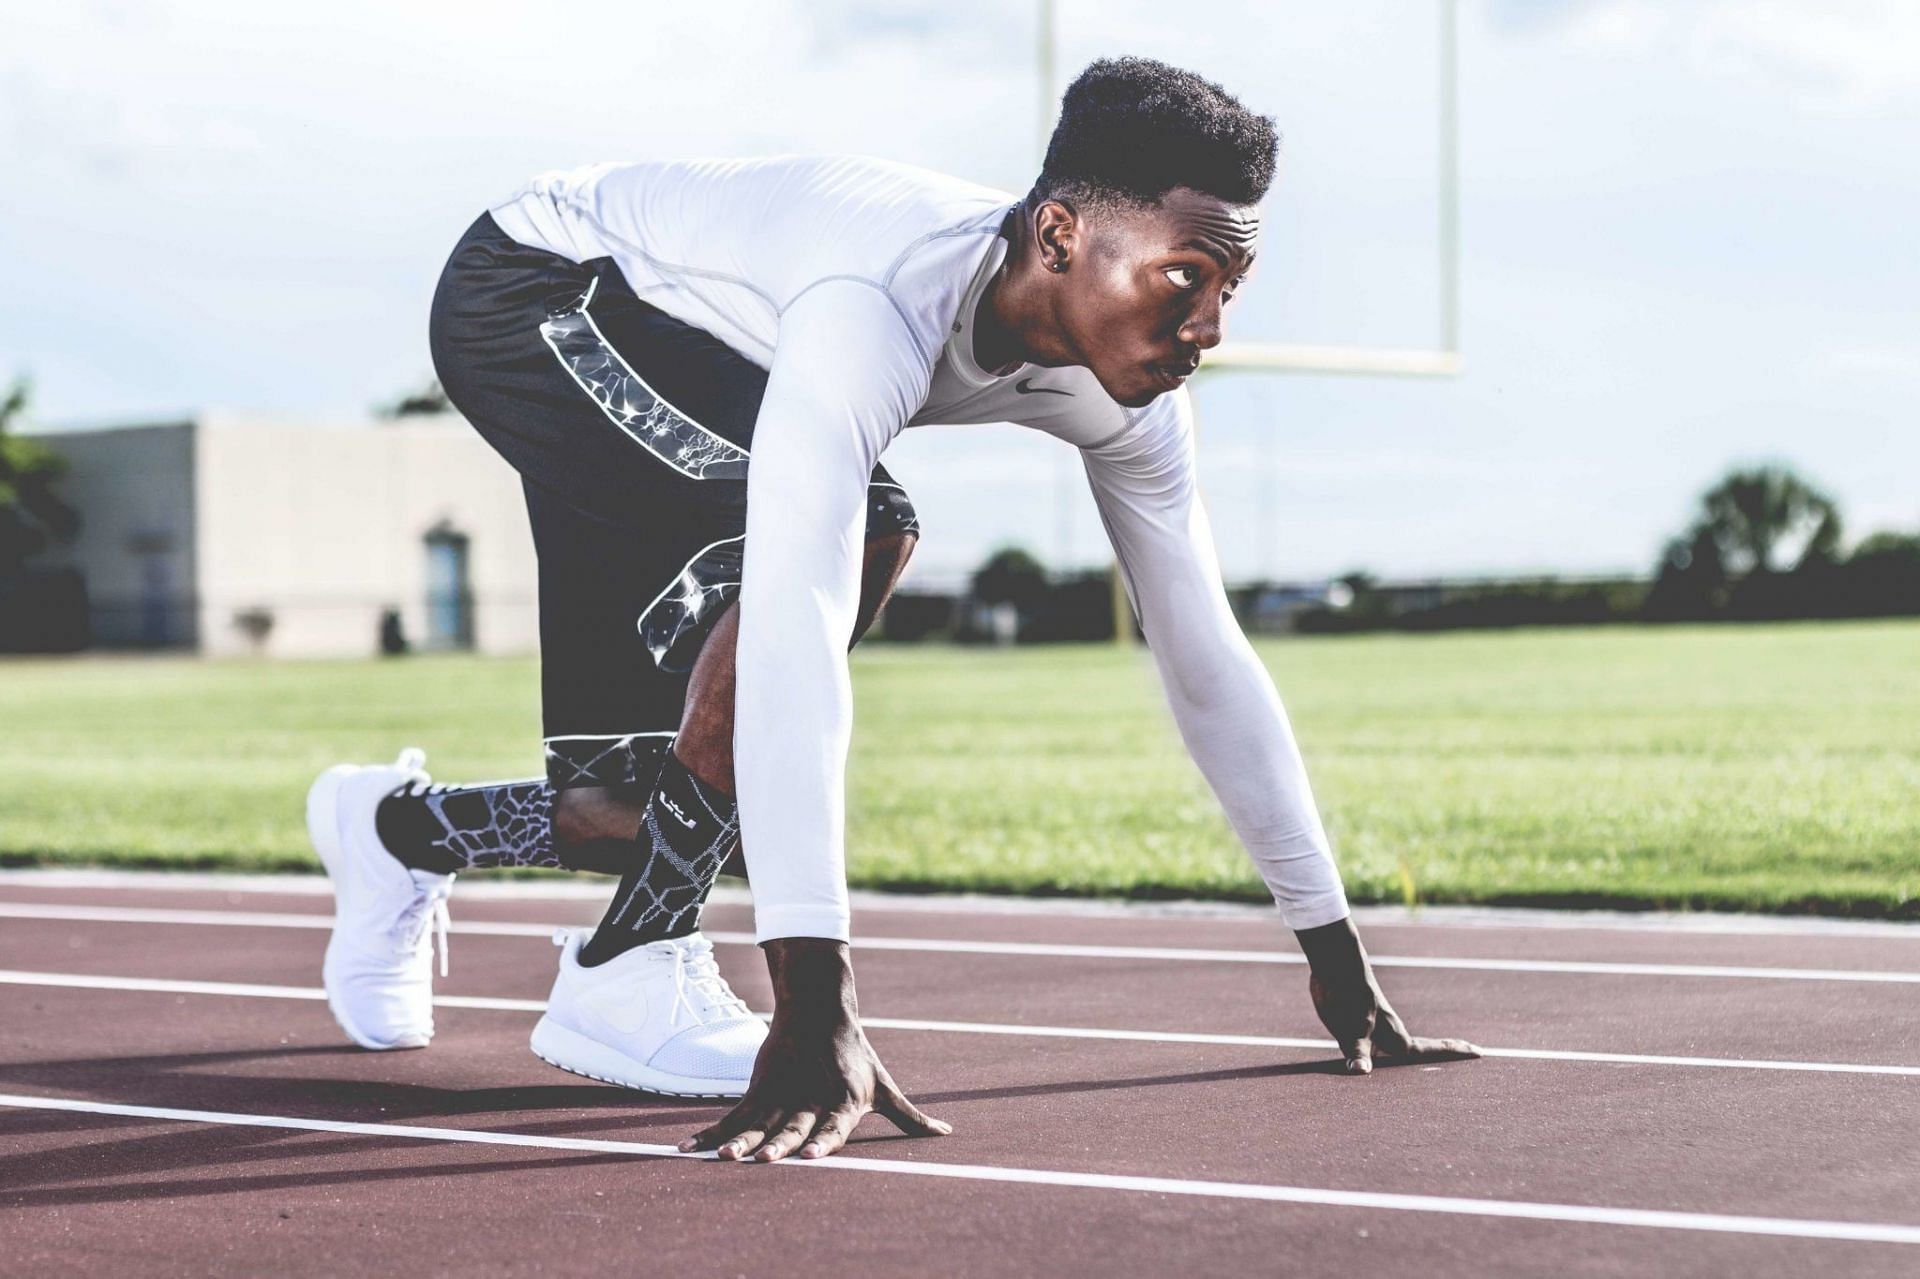 Enhances your athletic performance. (Image by Nappy / Pexels)